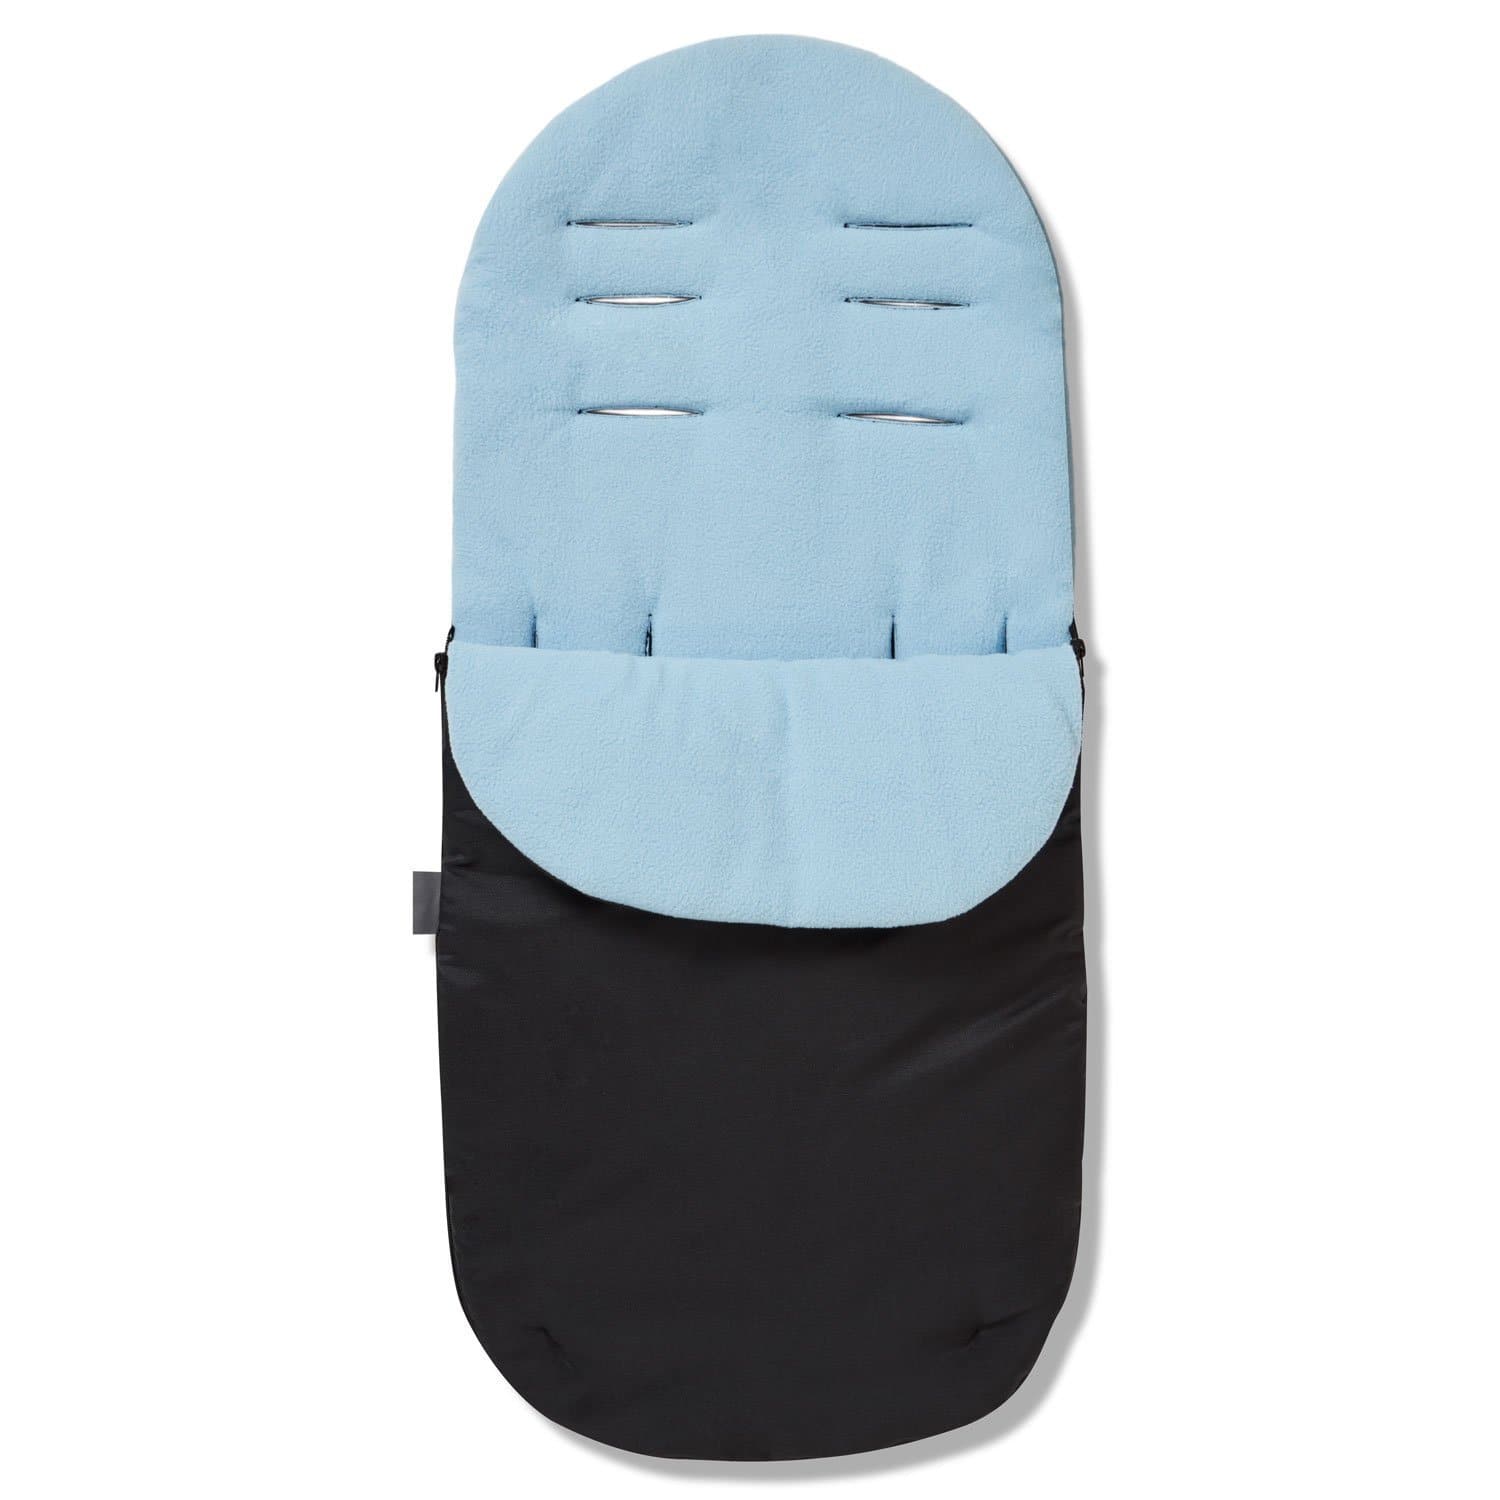 Footmuff / Cosy Toes Compatible with Baby Elegance - Light Blue / Fits All Models | For Your Little One